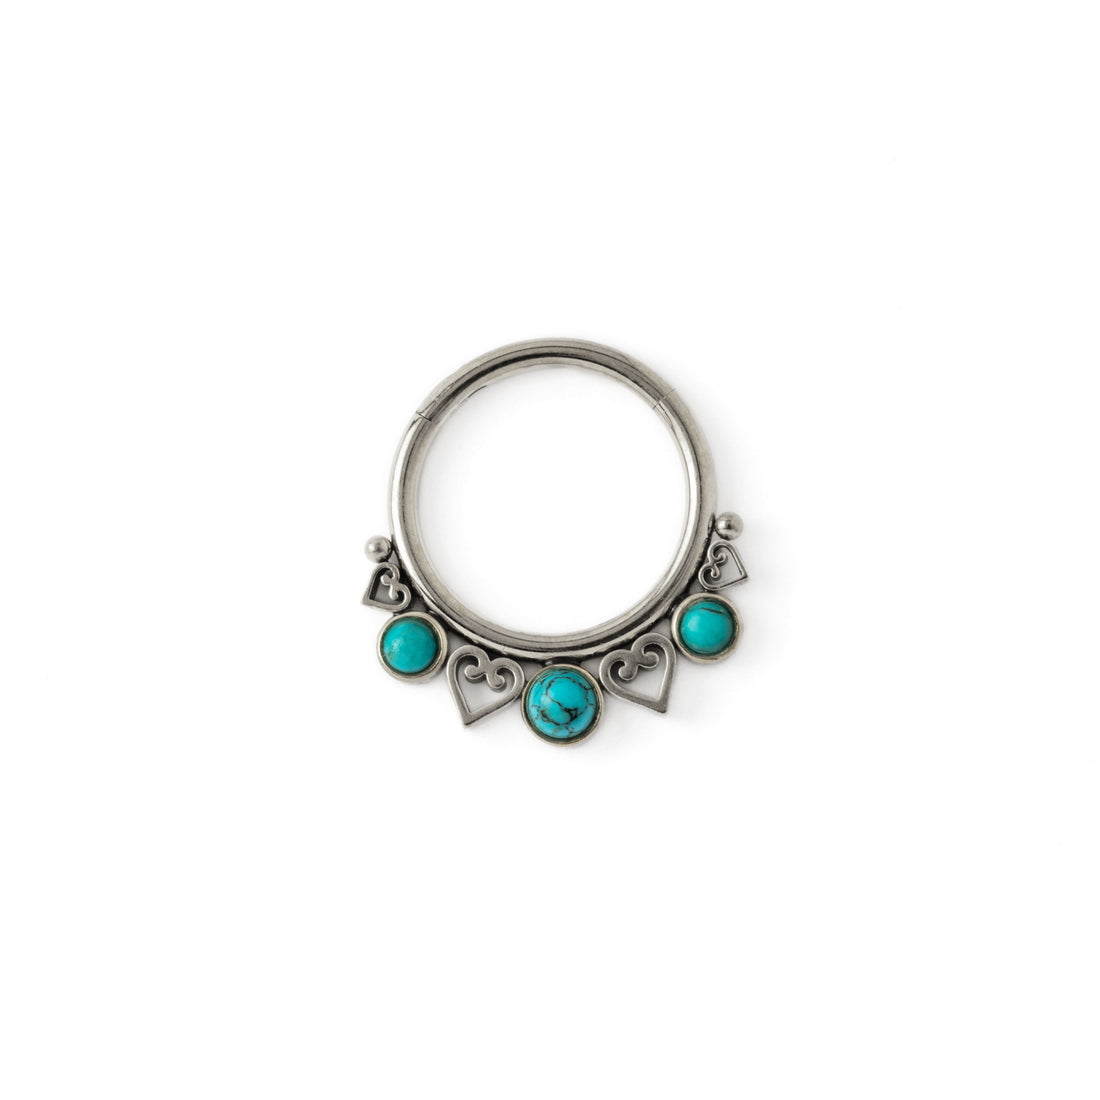 Neptune surgical steel septum clicker with Turquoise frontal view